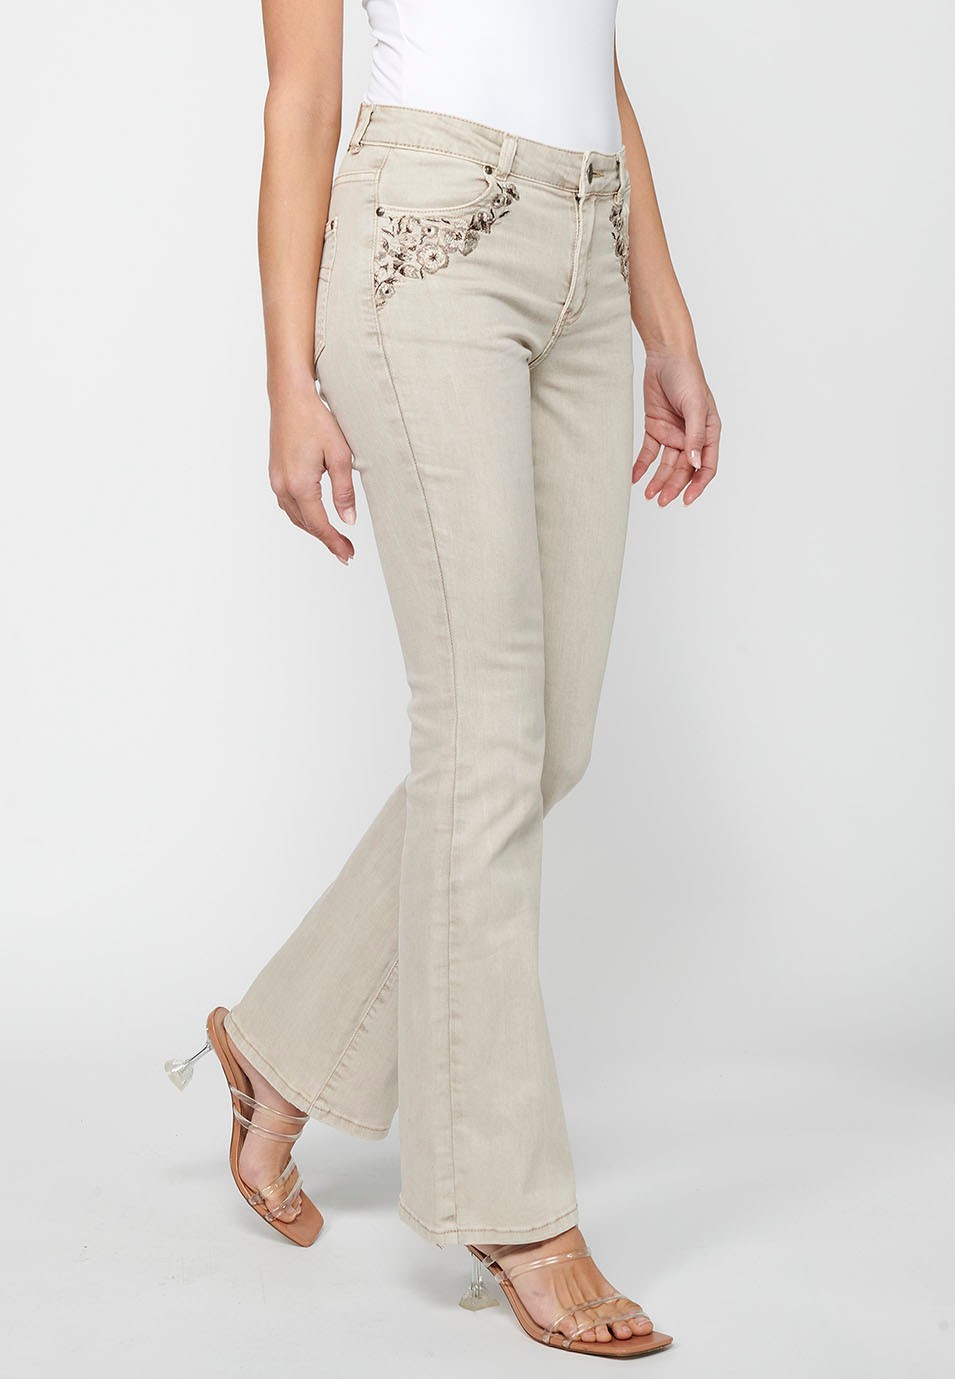 Long bell bottom pants with front zipper closure in Beige for Women 1